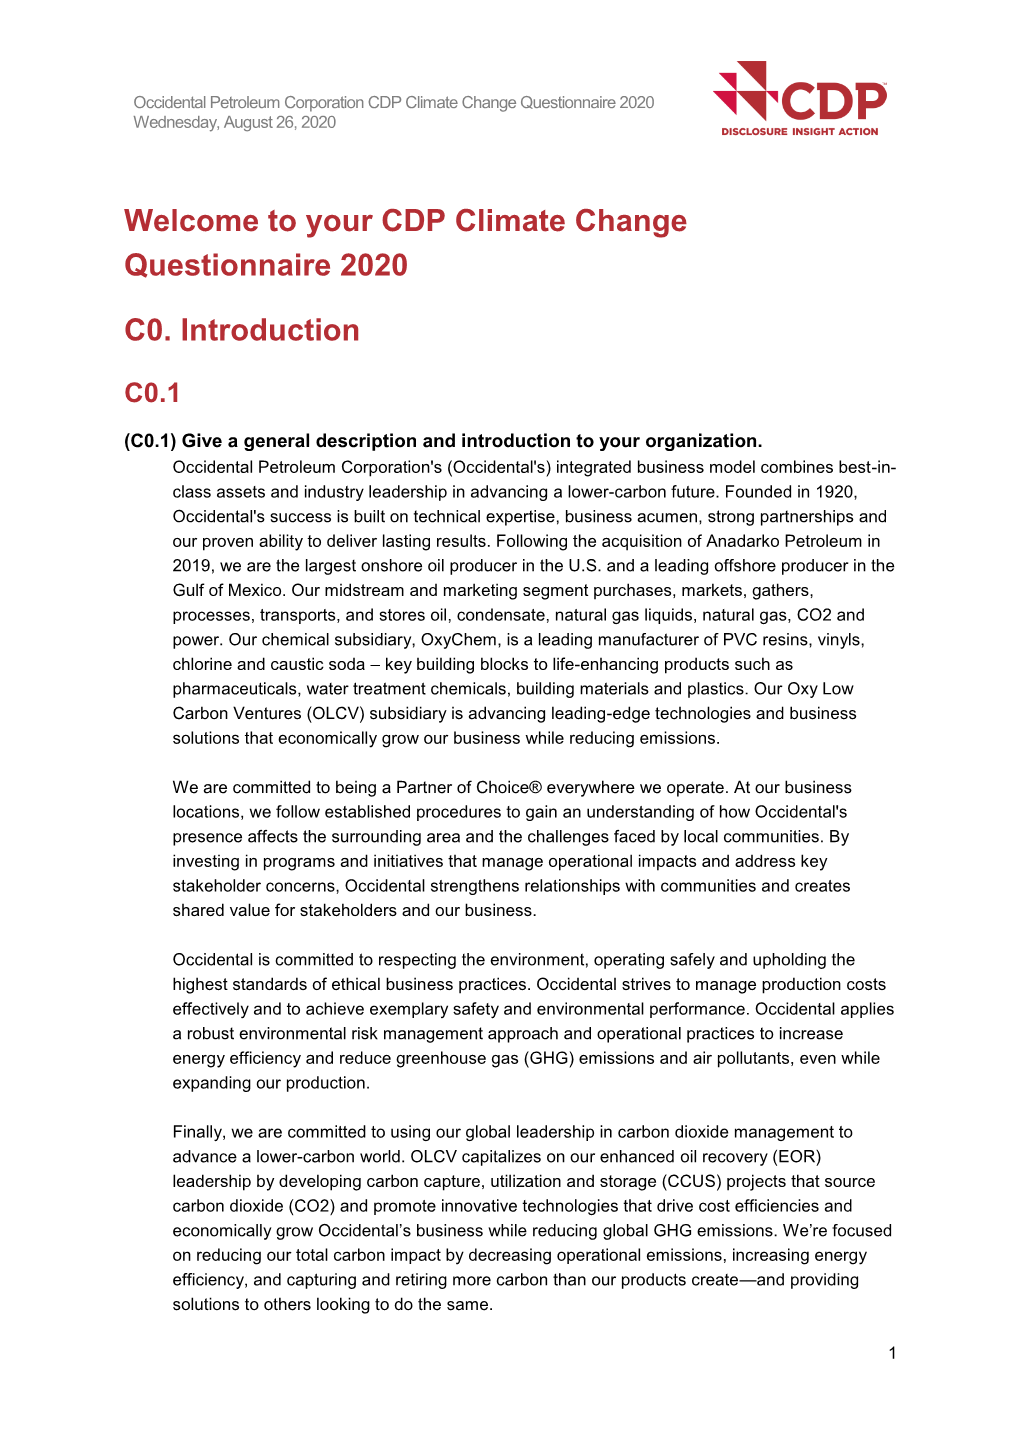 Welcome to Your CDP Climate Change Questionnaire 2020